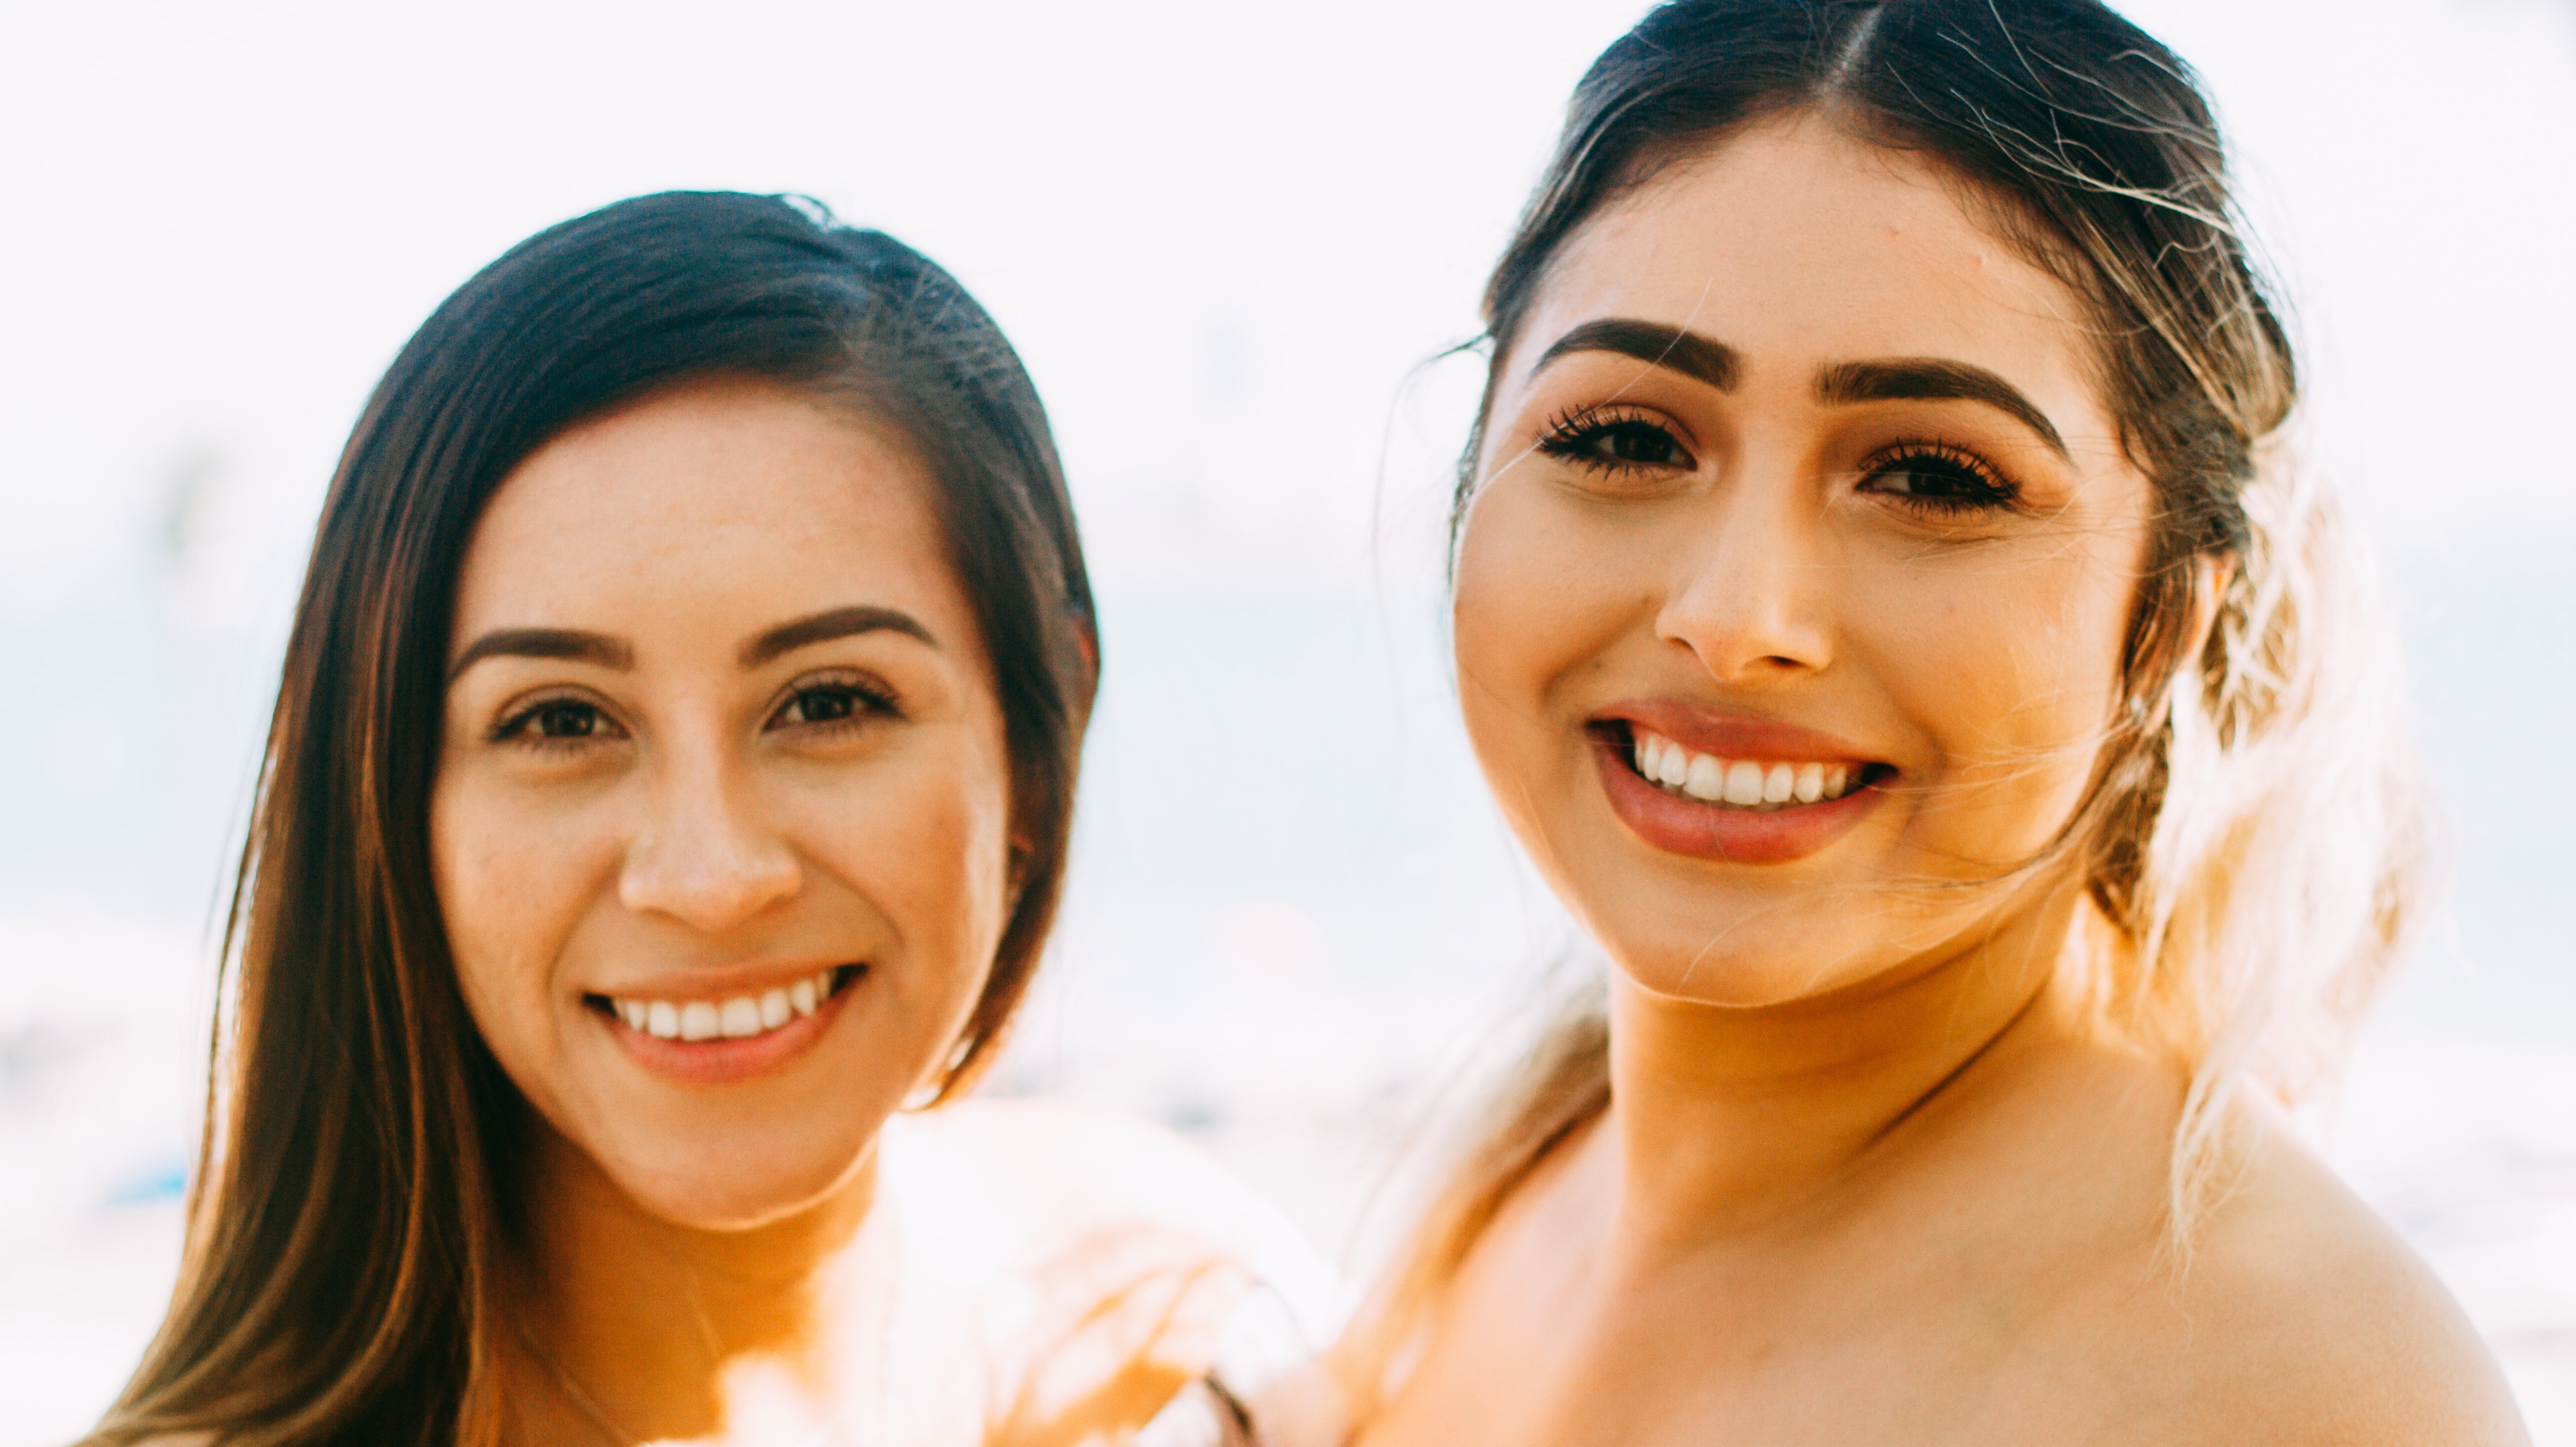 Latinx vs. Hispanic: What’s The Difference and Why Does It Matter?